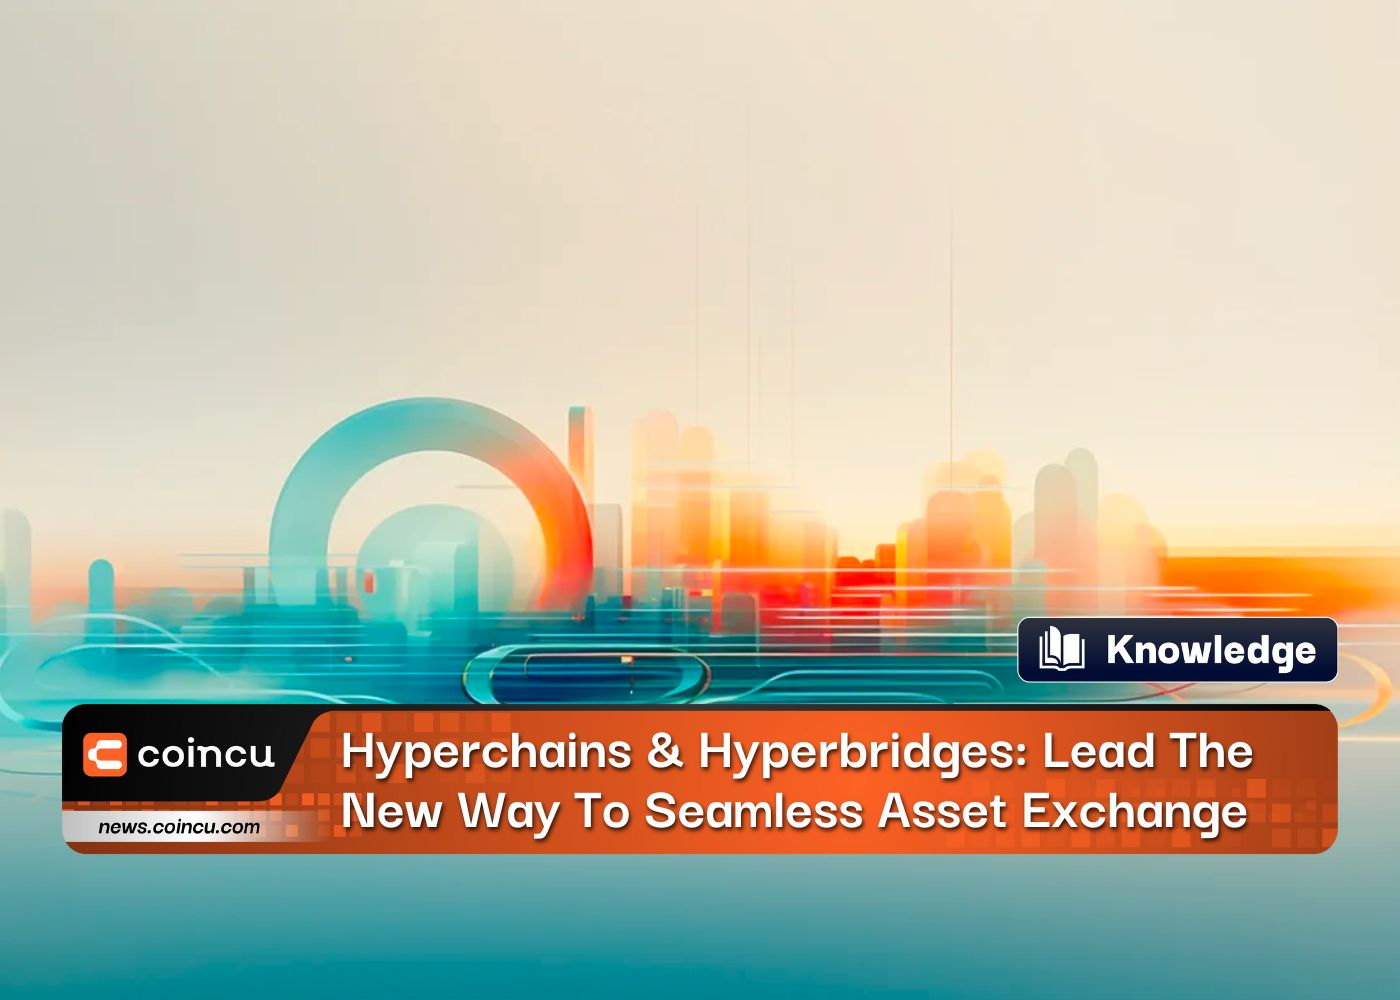 Hyperchains & Hyperbridges: Lead The New Way To Seamless Asset Exchange